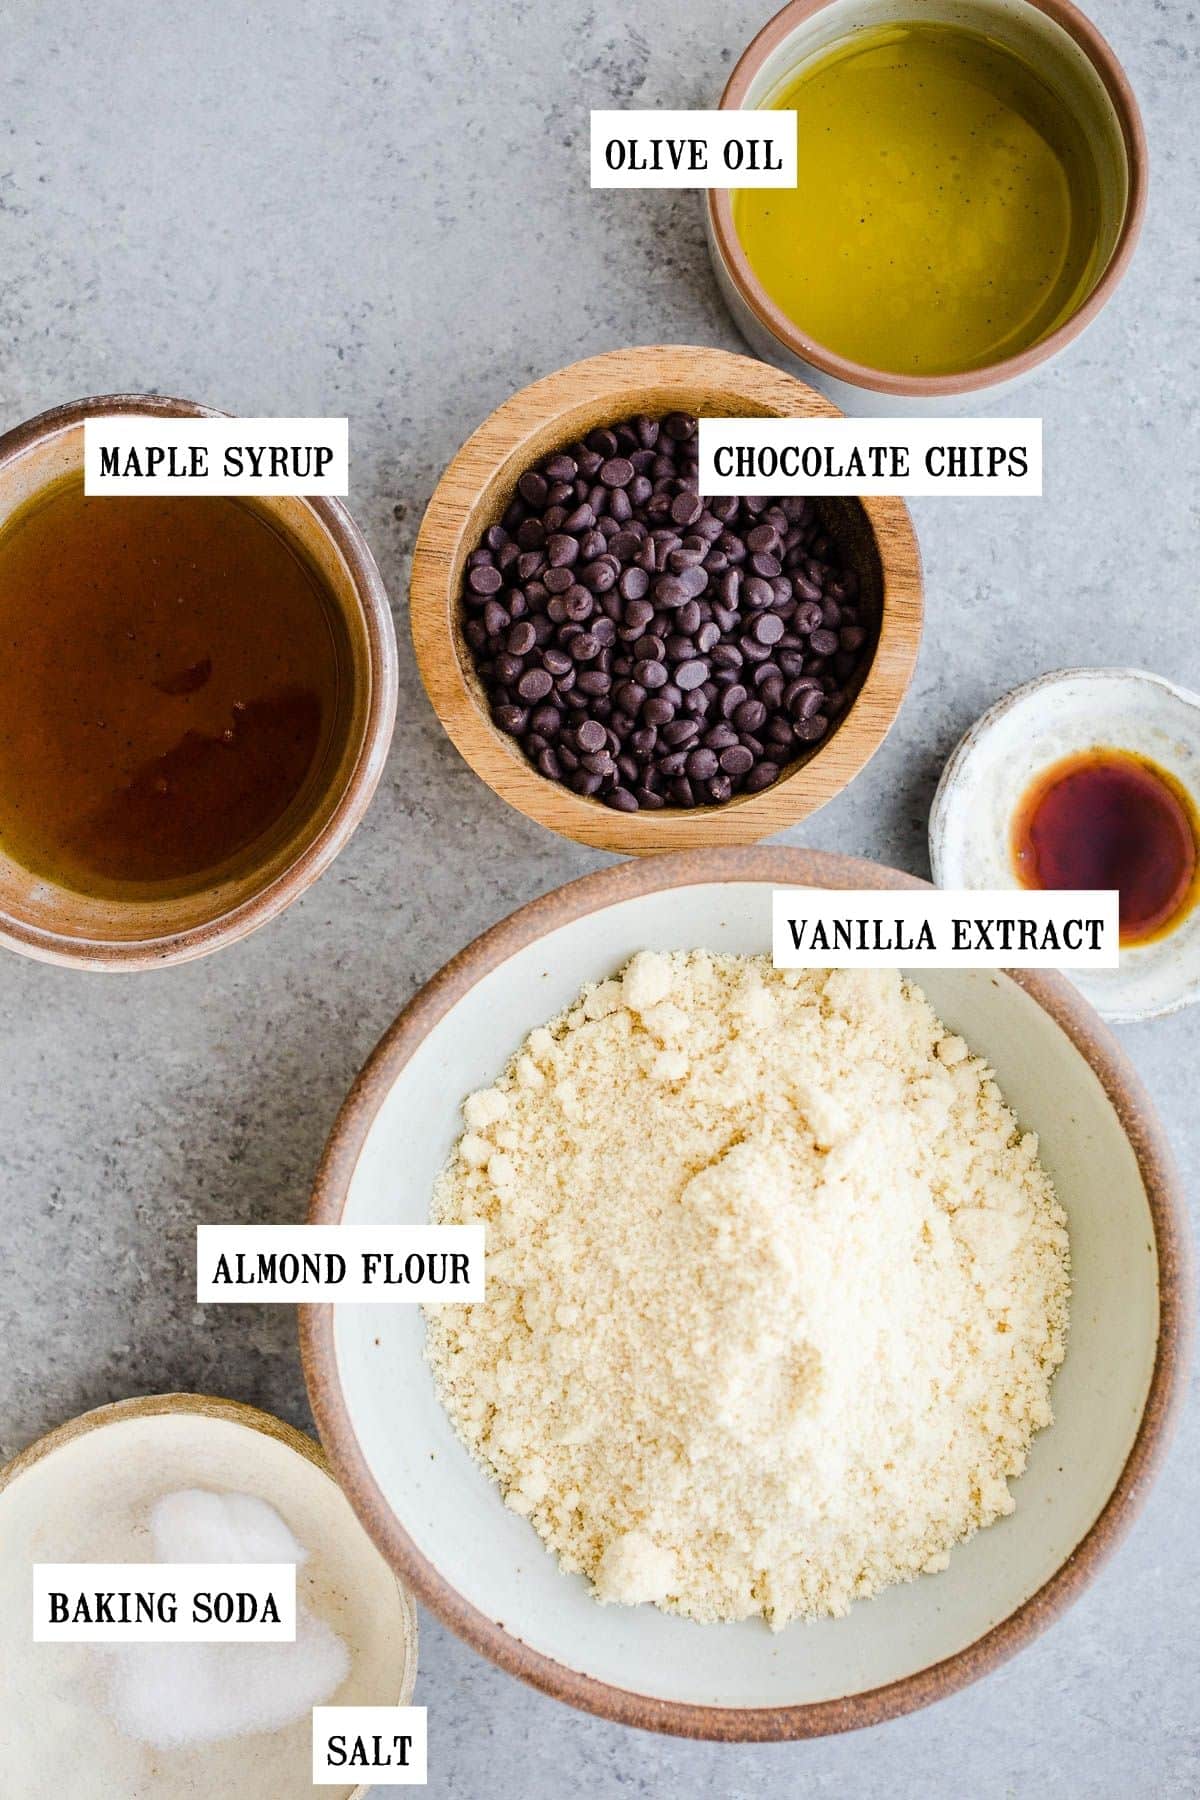 Ingredients for almond flour cookies in small bowls.